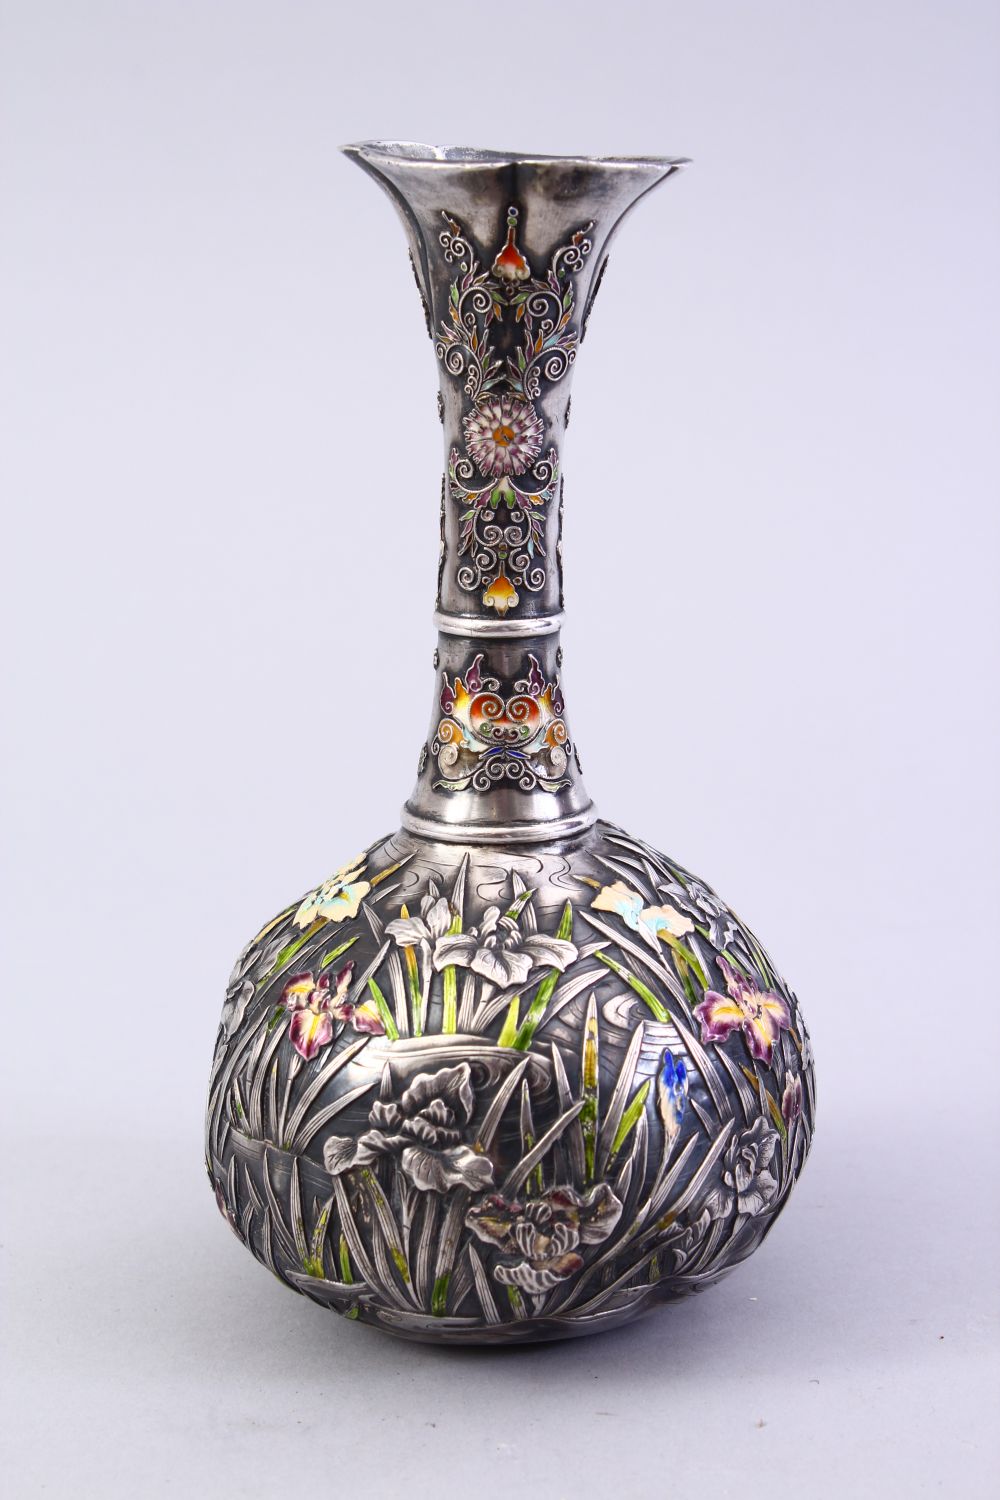 A GOOD JAPANESE MEIJI PERIOD SILVER & ENAMEL BOTTLE VASE, the vase with iris and other floral - Image 3 of 9